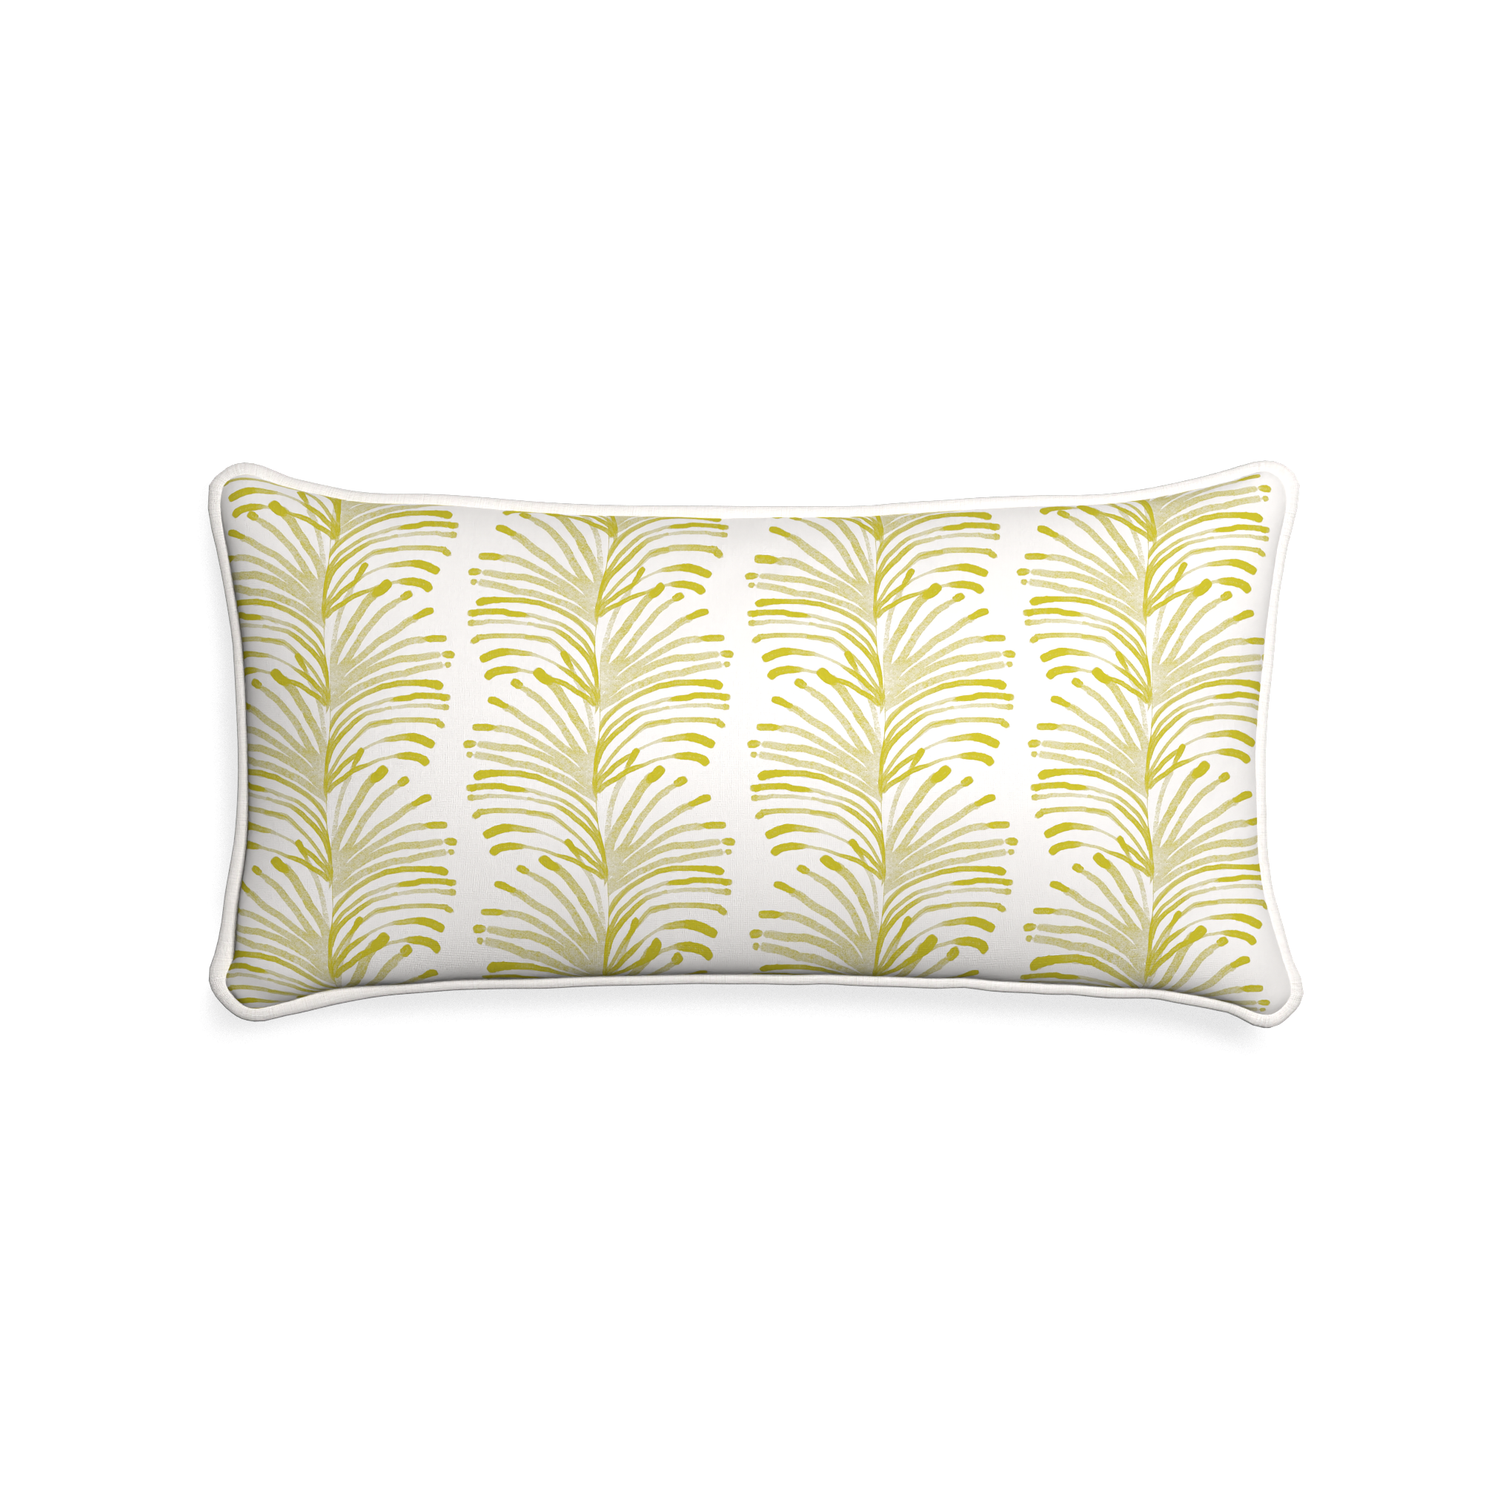 Midi-lumbar emma chartreuse custom yellow stripe chartreusepillow with snow piping on white background